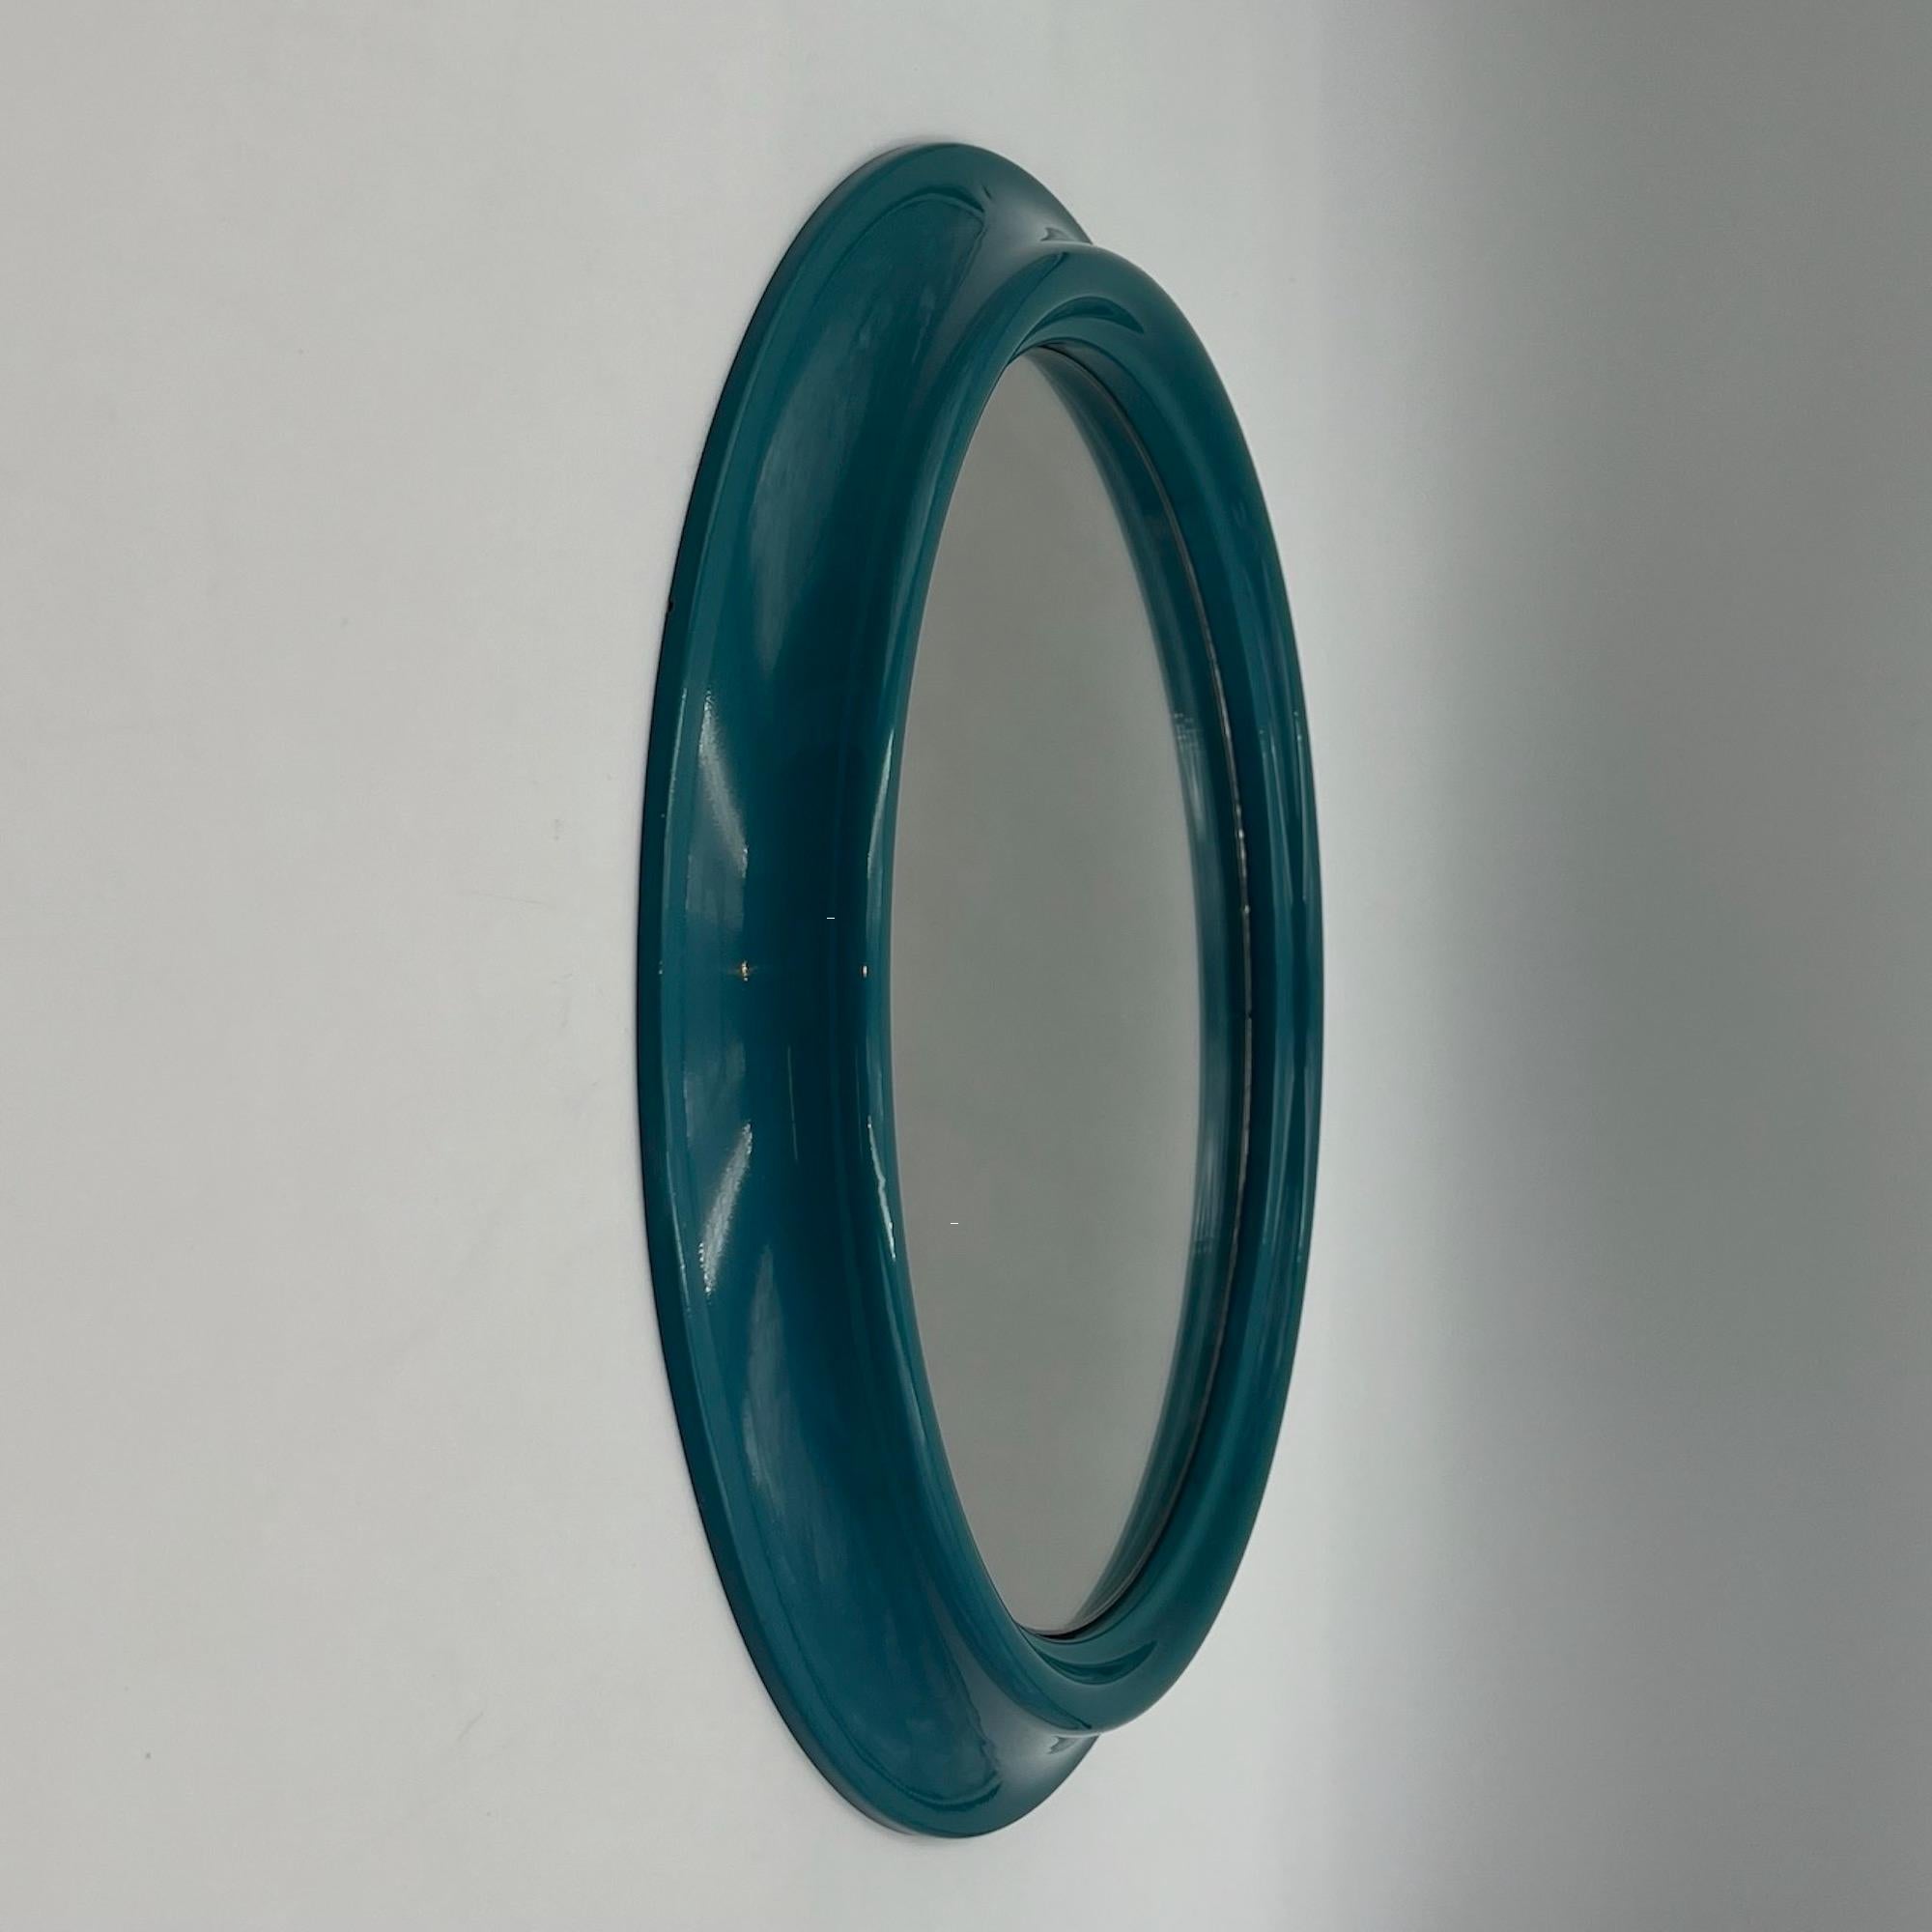 Italian Vintage Round Wall Mirror in Turquoise Blue Made in Italy, 1970s For Sale